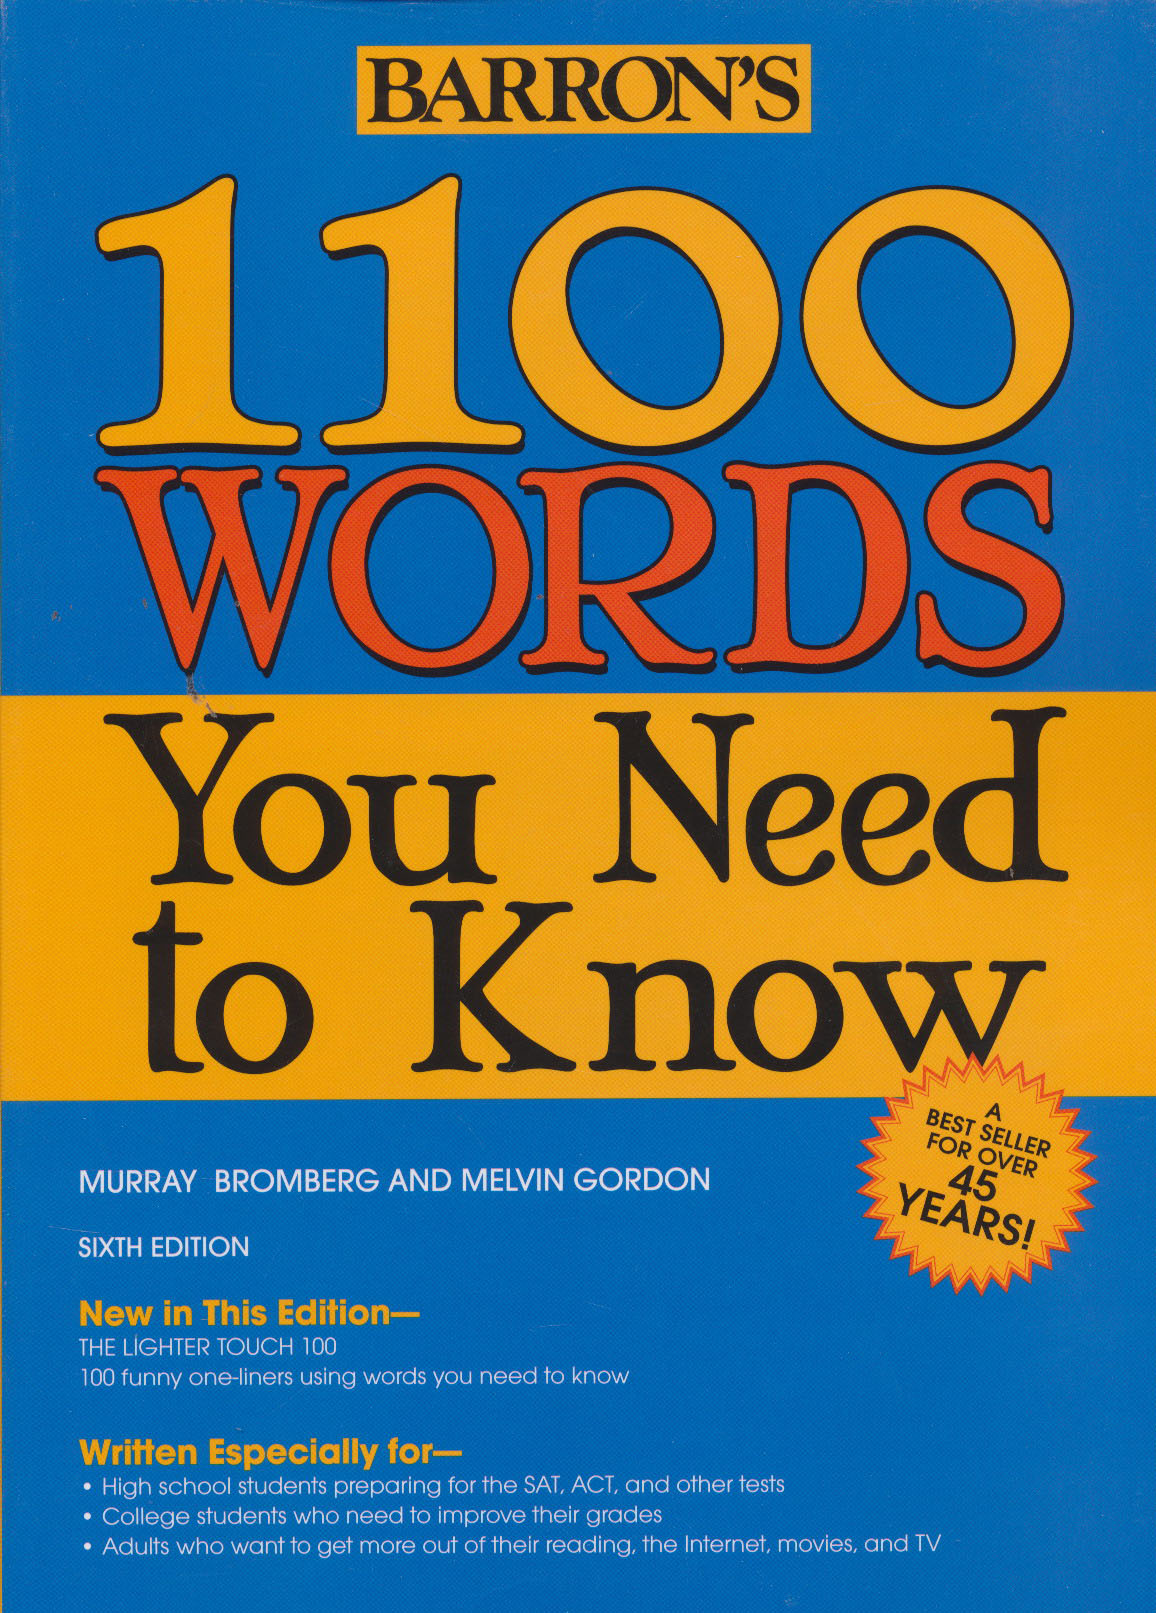 Barron's 1100 Words You Need to Know Barron的1100个你应该知道的词